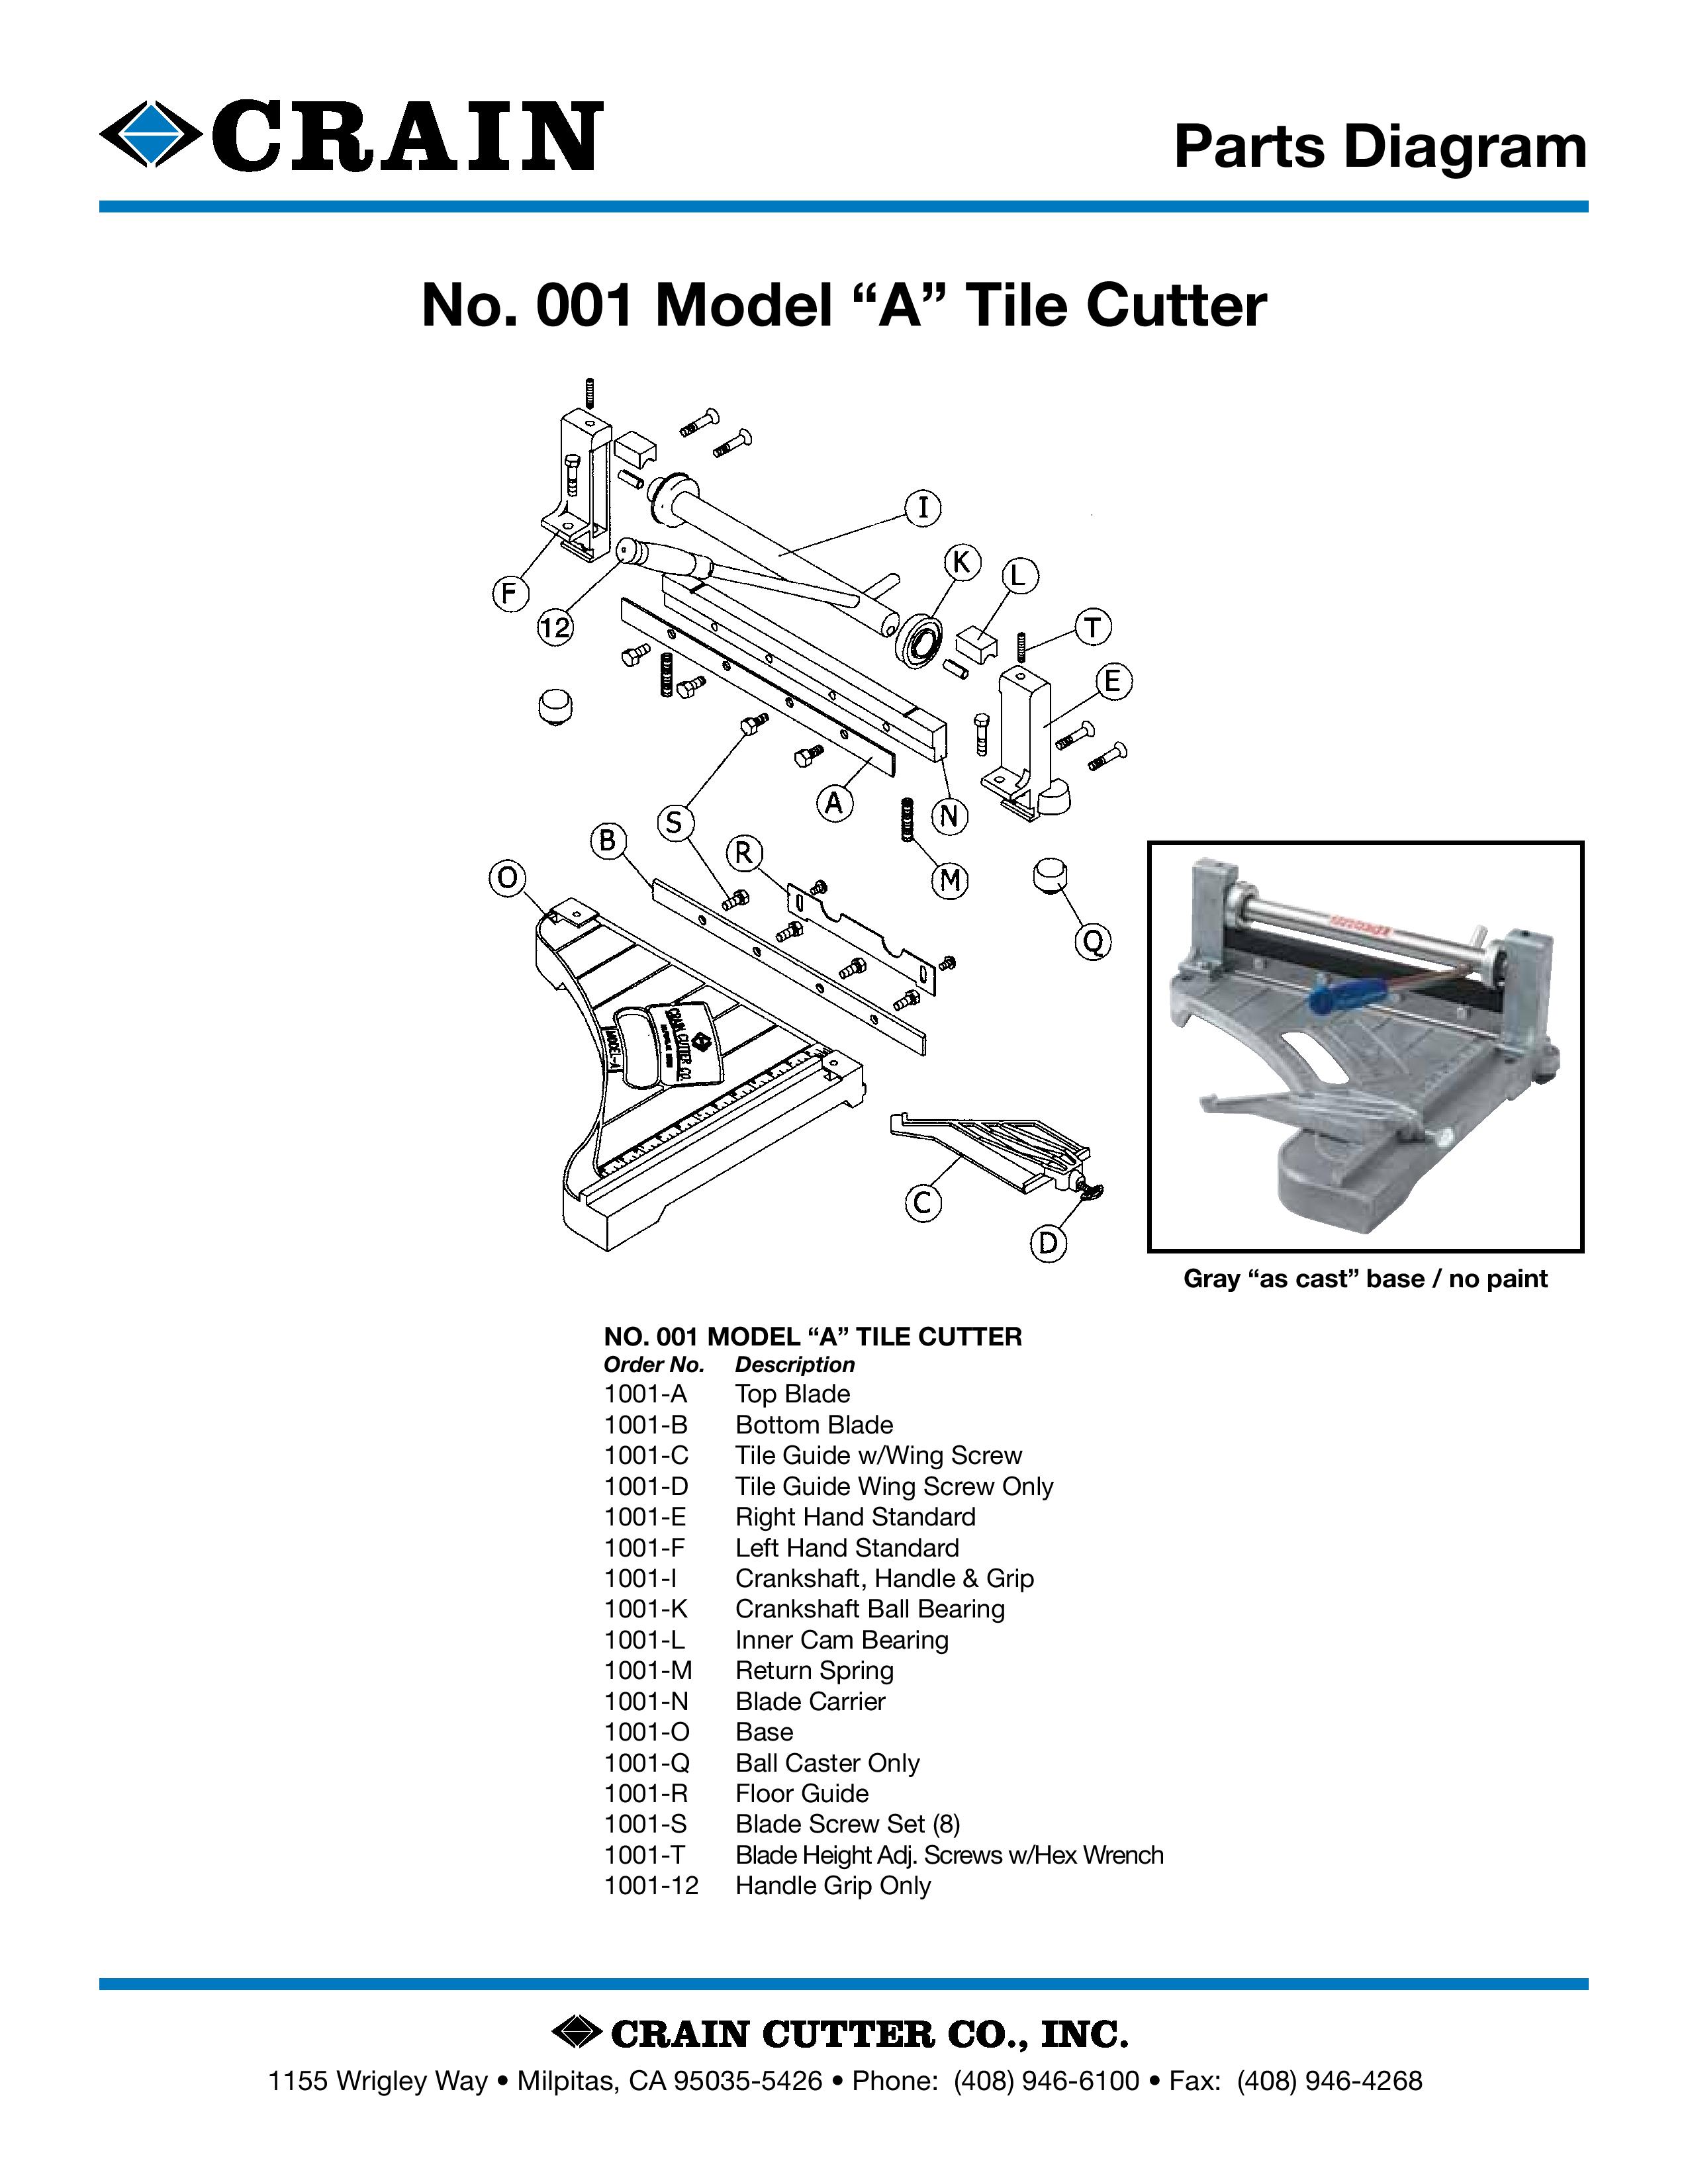 001 - Model “A” Tile Cutter Discontinued